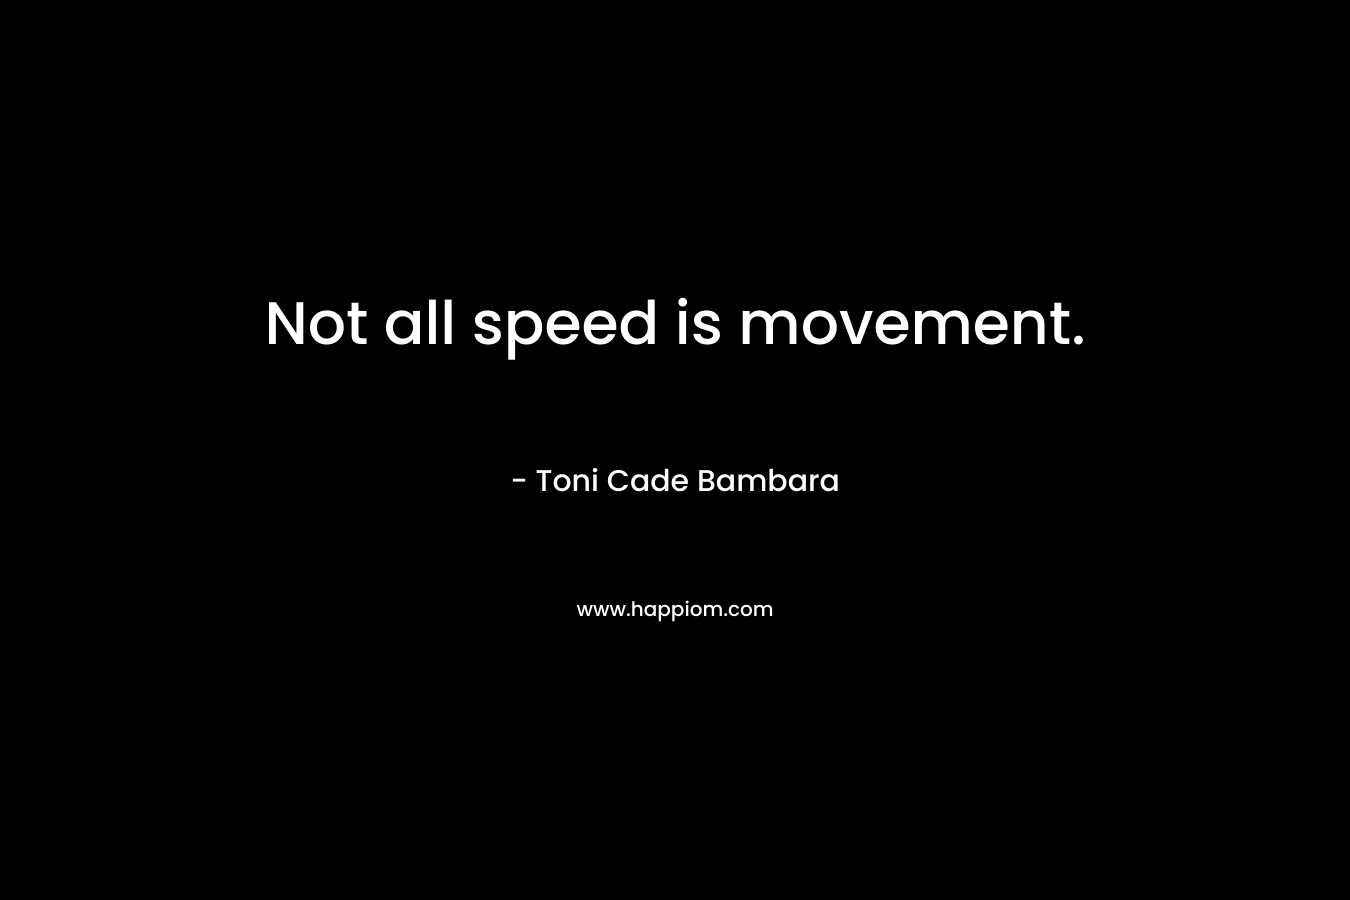 Not all speed is movement.